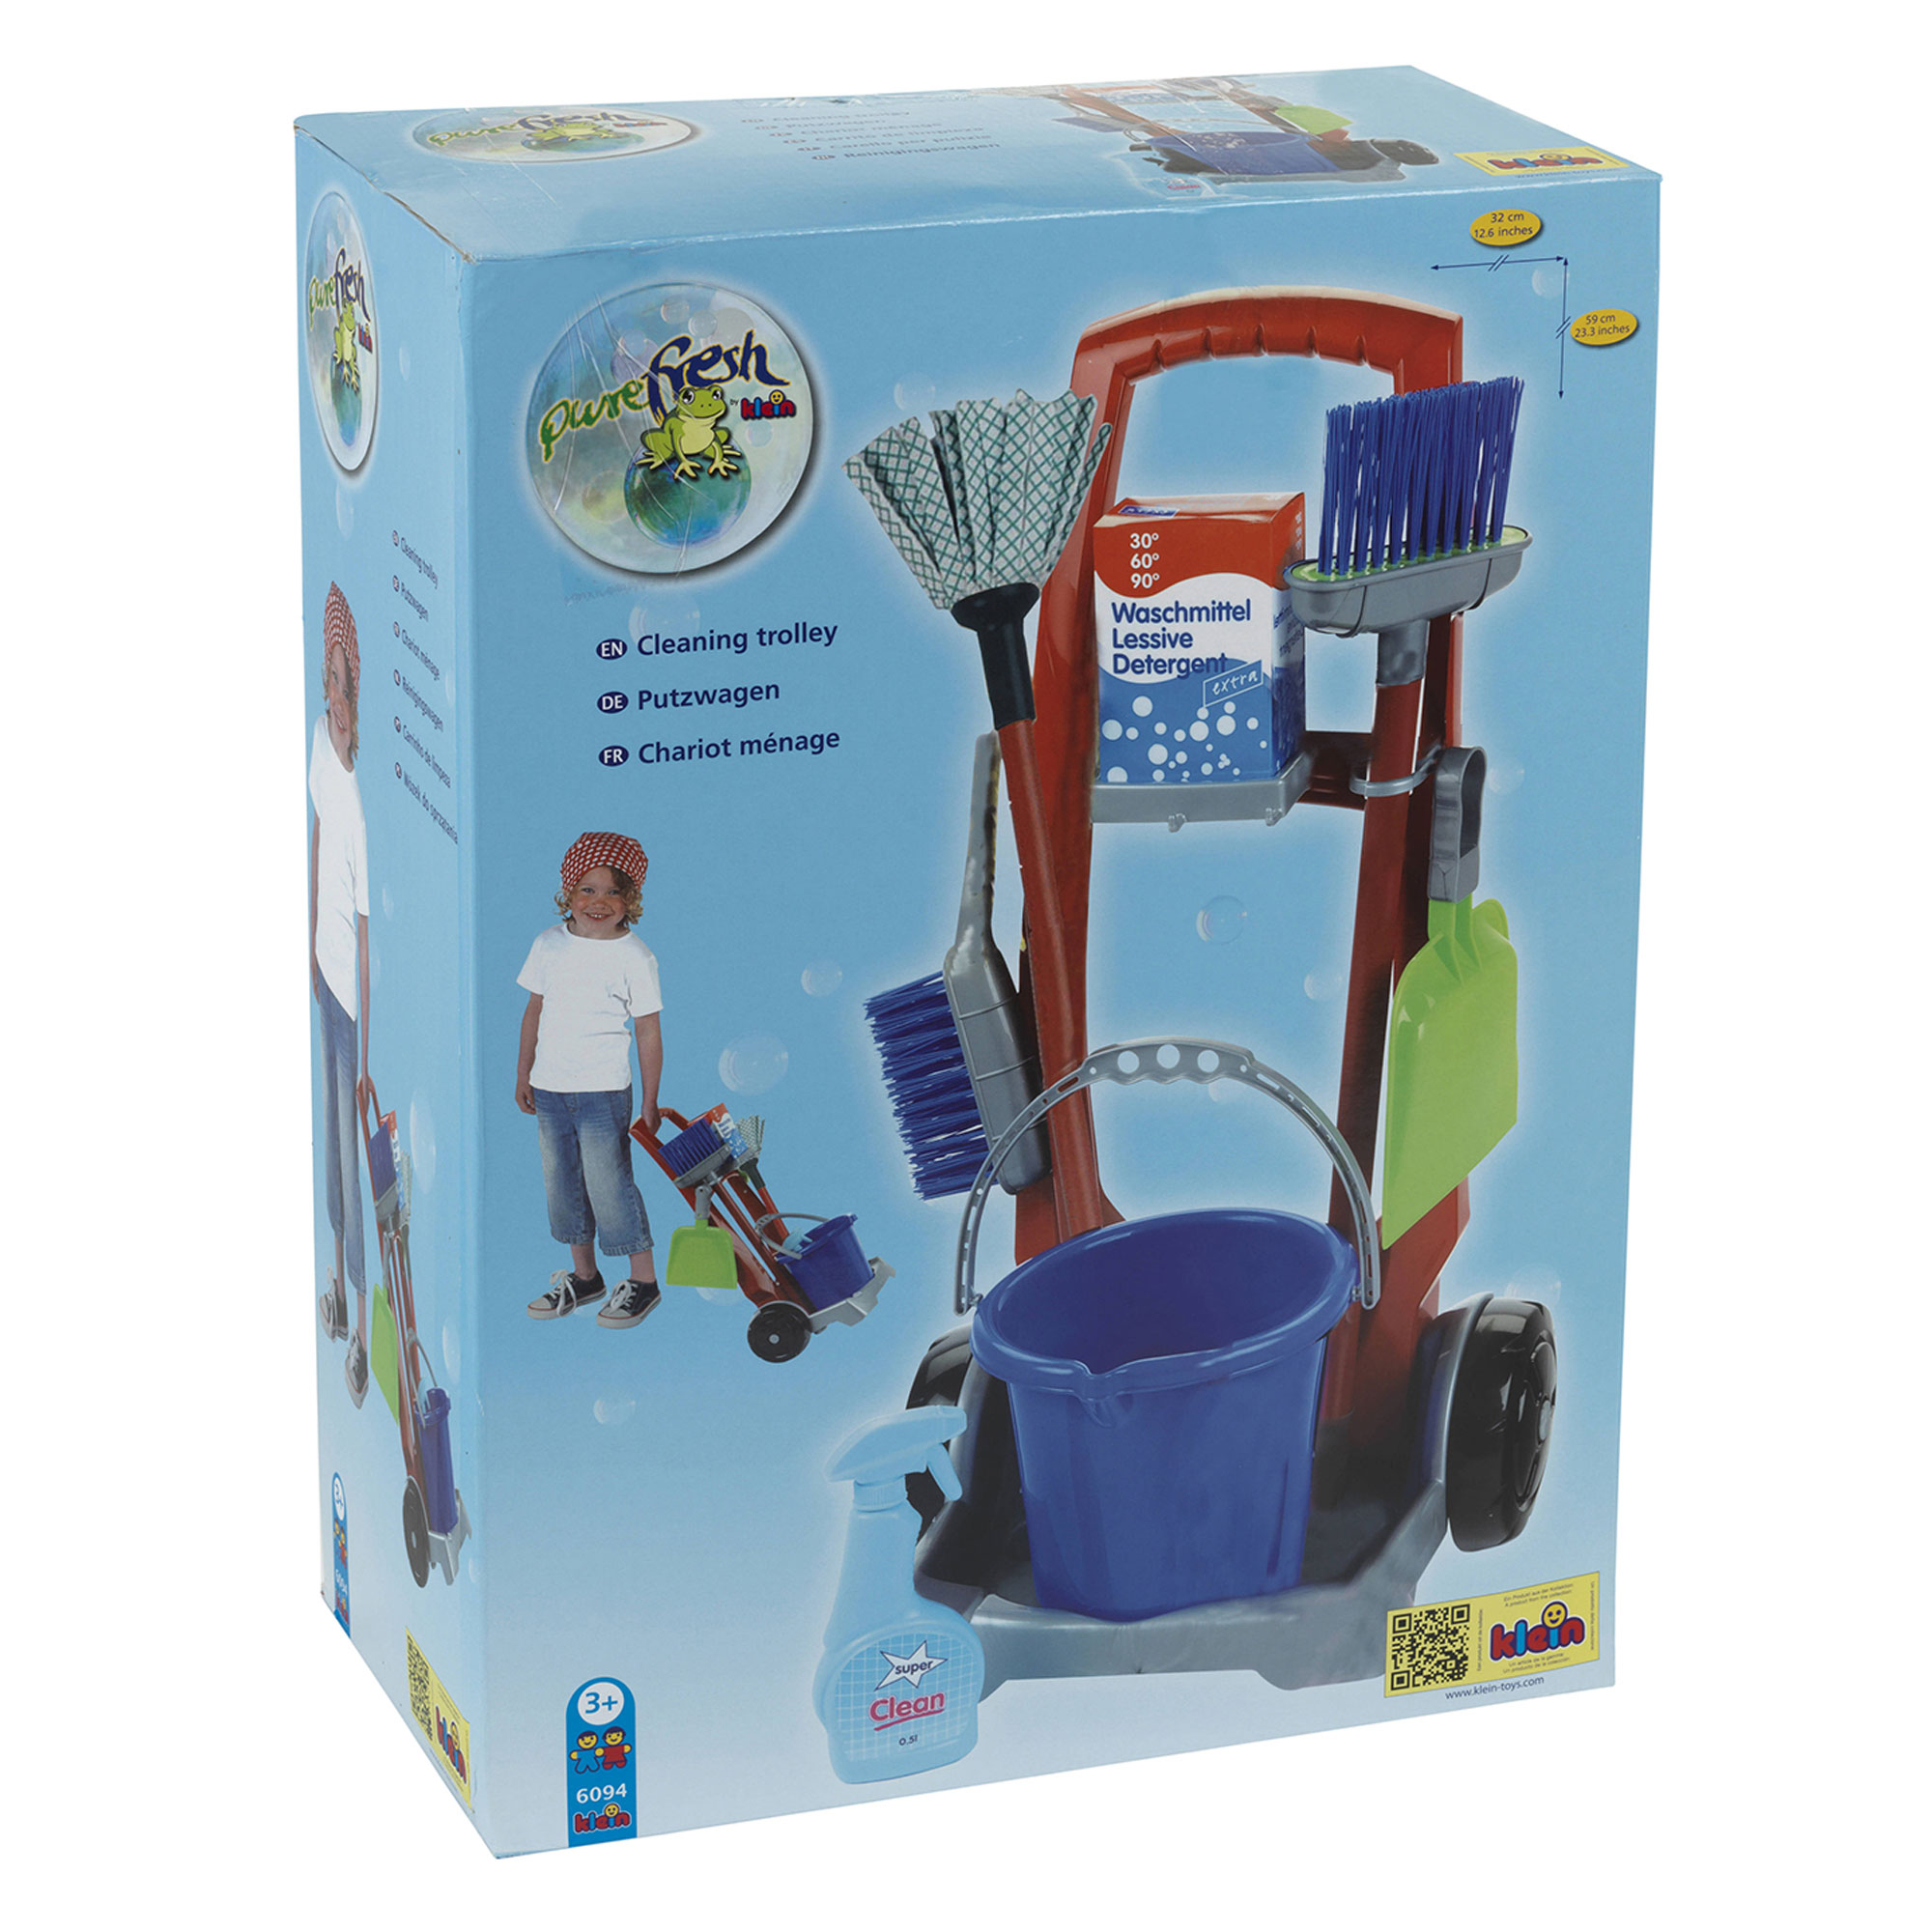 Theo Klein: Cleaning Trolley Set - Kid's 8 Piece Toy Set Includes: Trolley, Bucket, Mop, Broom, Dustpan w/ Brush, Bottle & Detergent Box, Kids Pretend Play, Ages 3+ - image 5 of 5